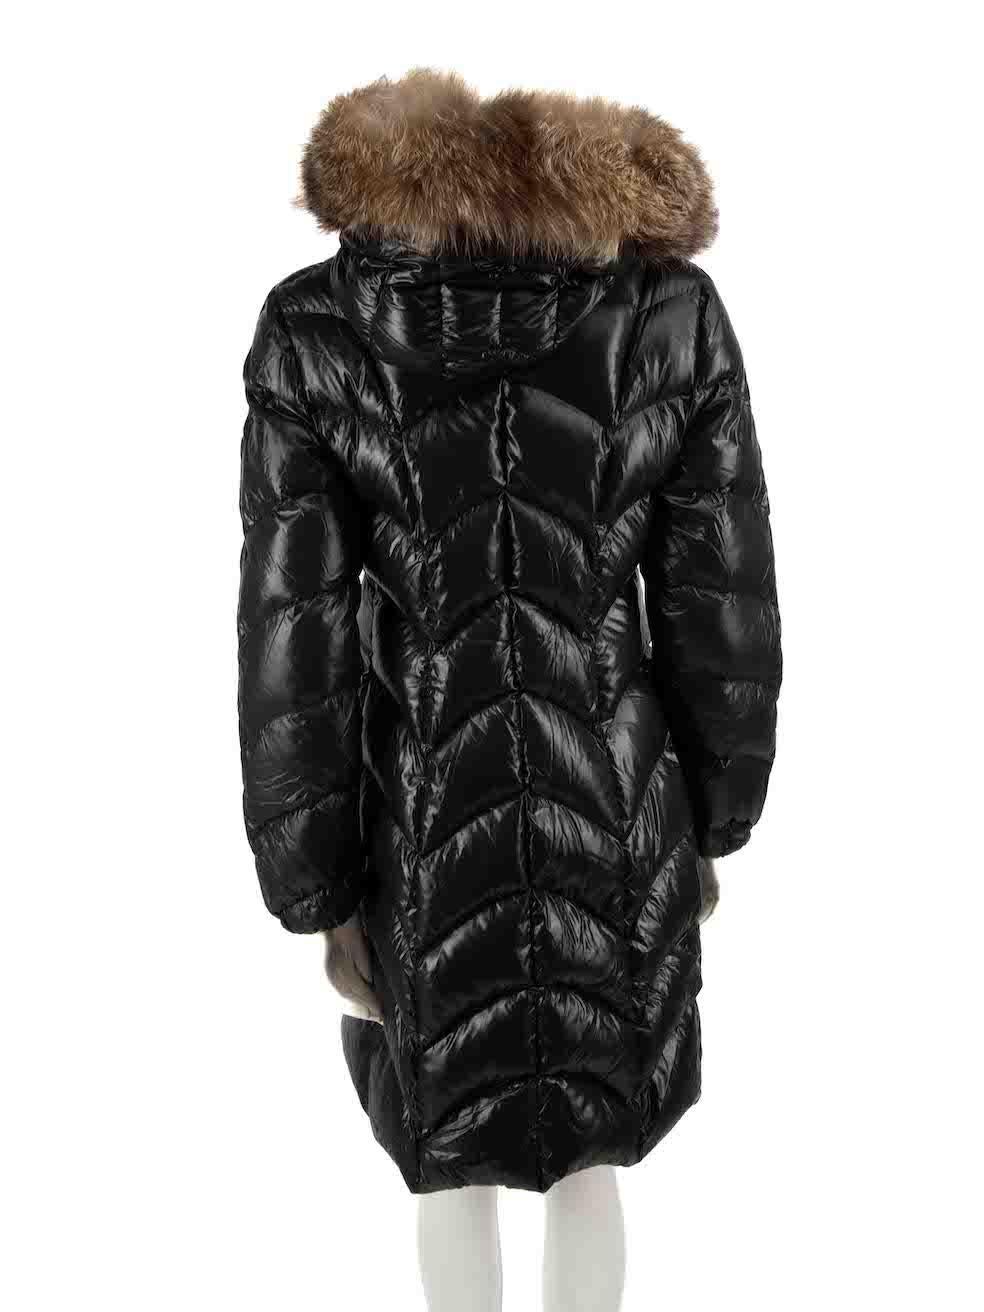 Moncler Black Fur Trim Hood Puffer Coat Size M In Excellent Condition For Sale In London, GB